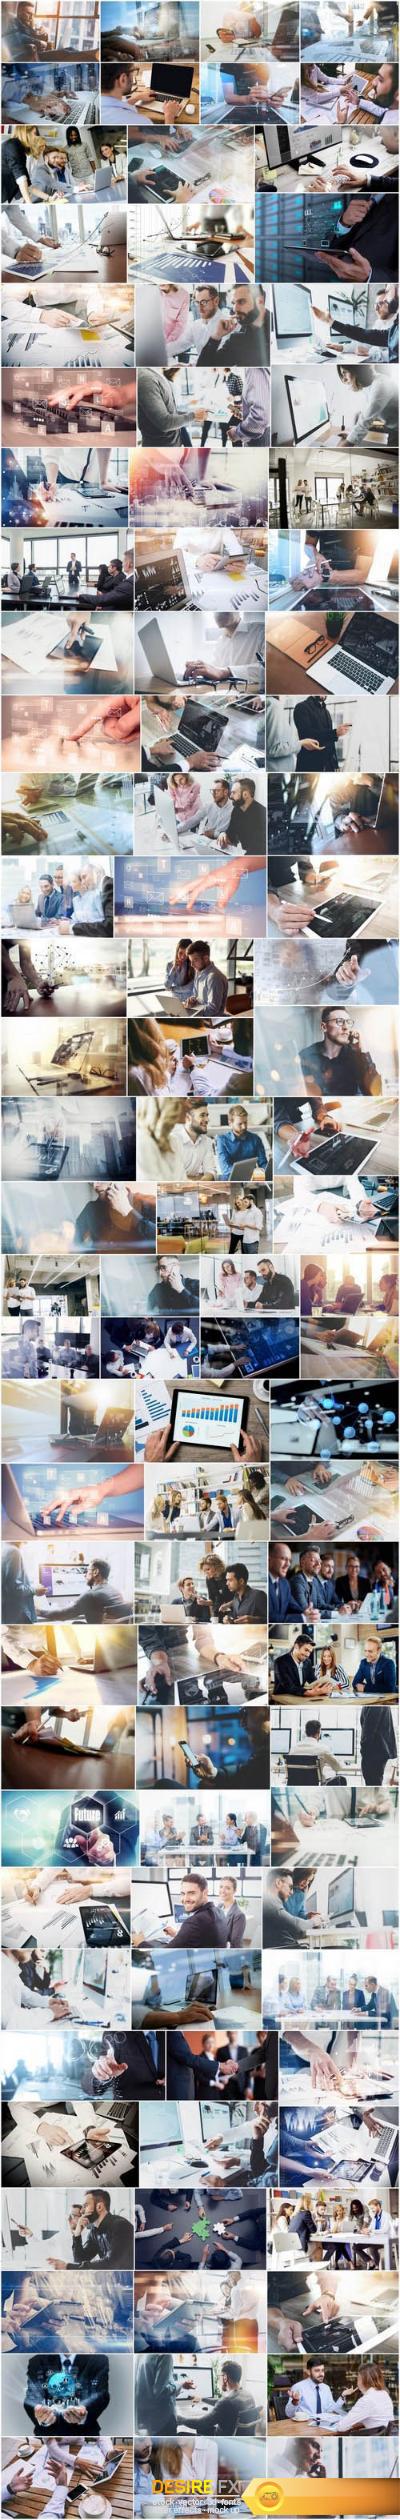 Business team, StartUp and Corporation - 100xUHQ JPEG Professional Stock Images